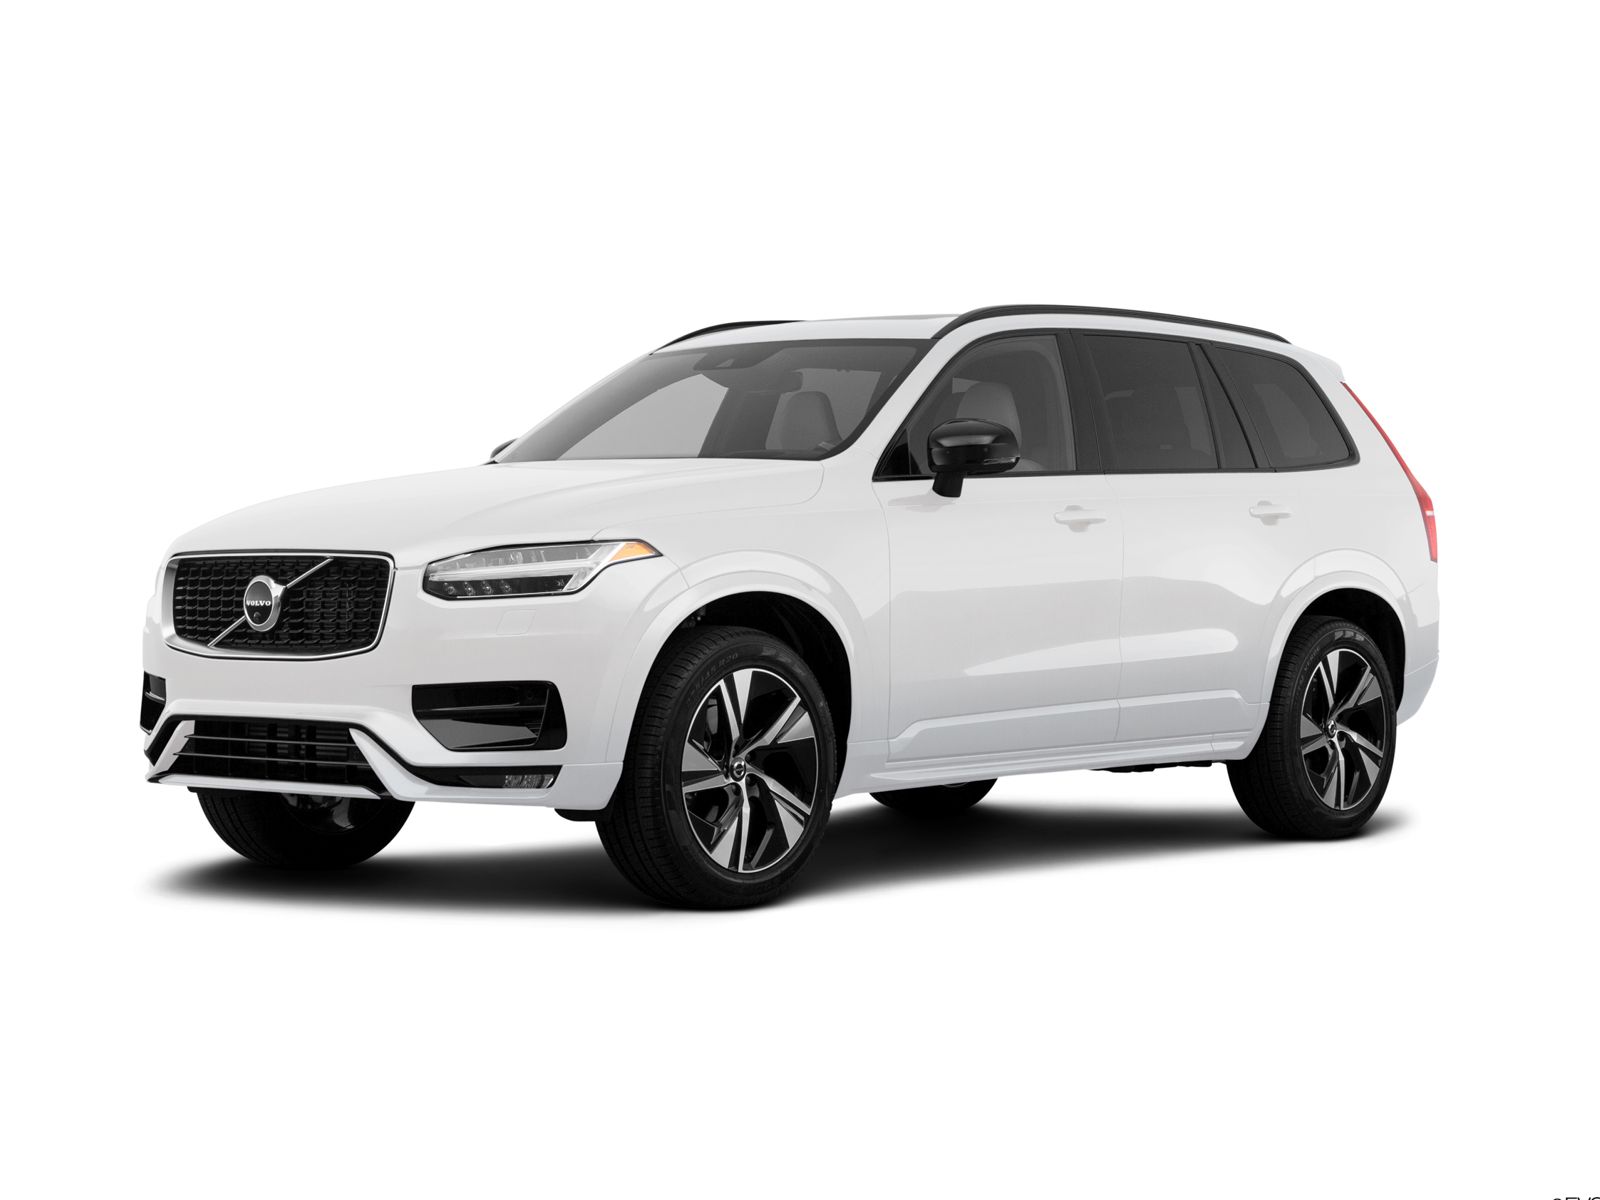 2020 Volvo XC90 Research, Photos, Specs and Expertise | CarMax